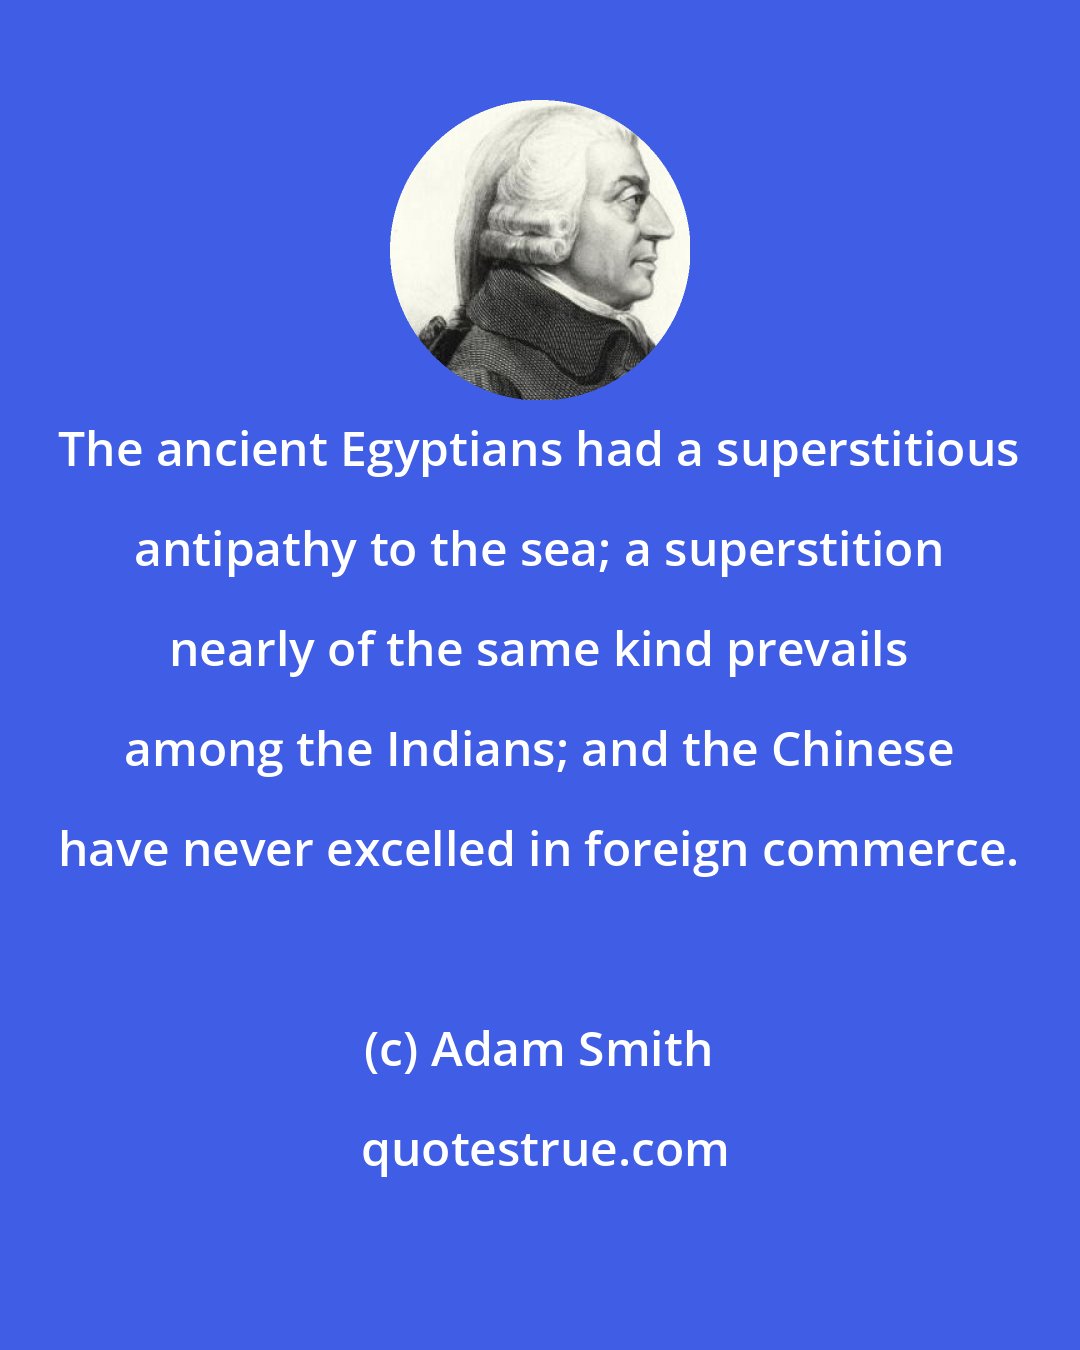 Adam Smith: The ancient Egyptians had a superstitious antipathy to the sea; a superstition nearly of the same kind prevails among the Indians; and the Chinese have never excelled in foreign commerce.